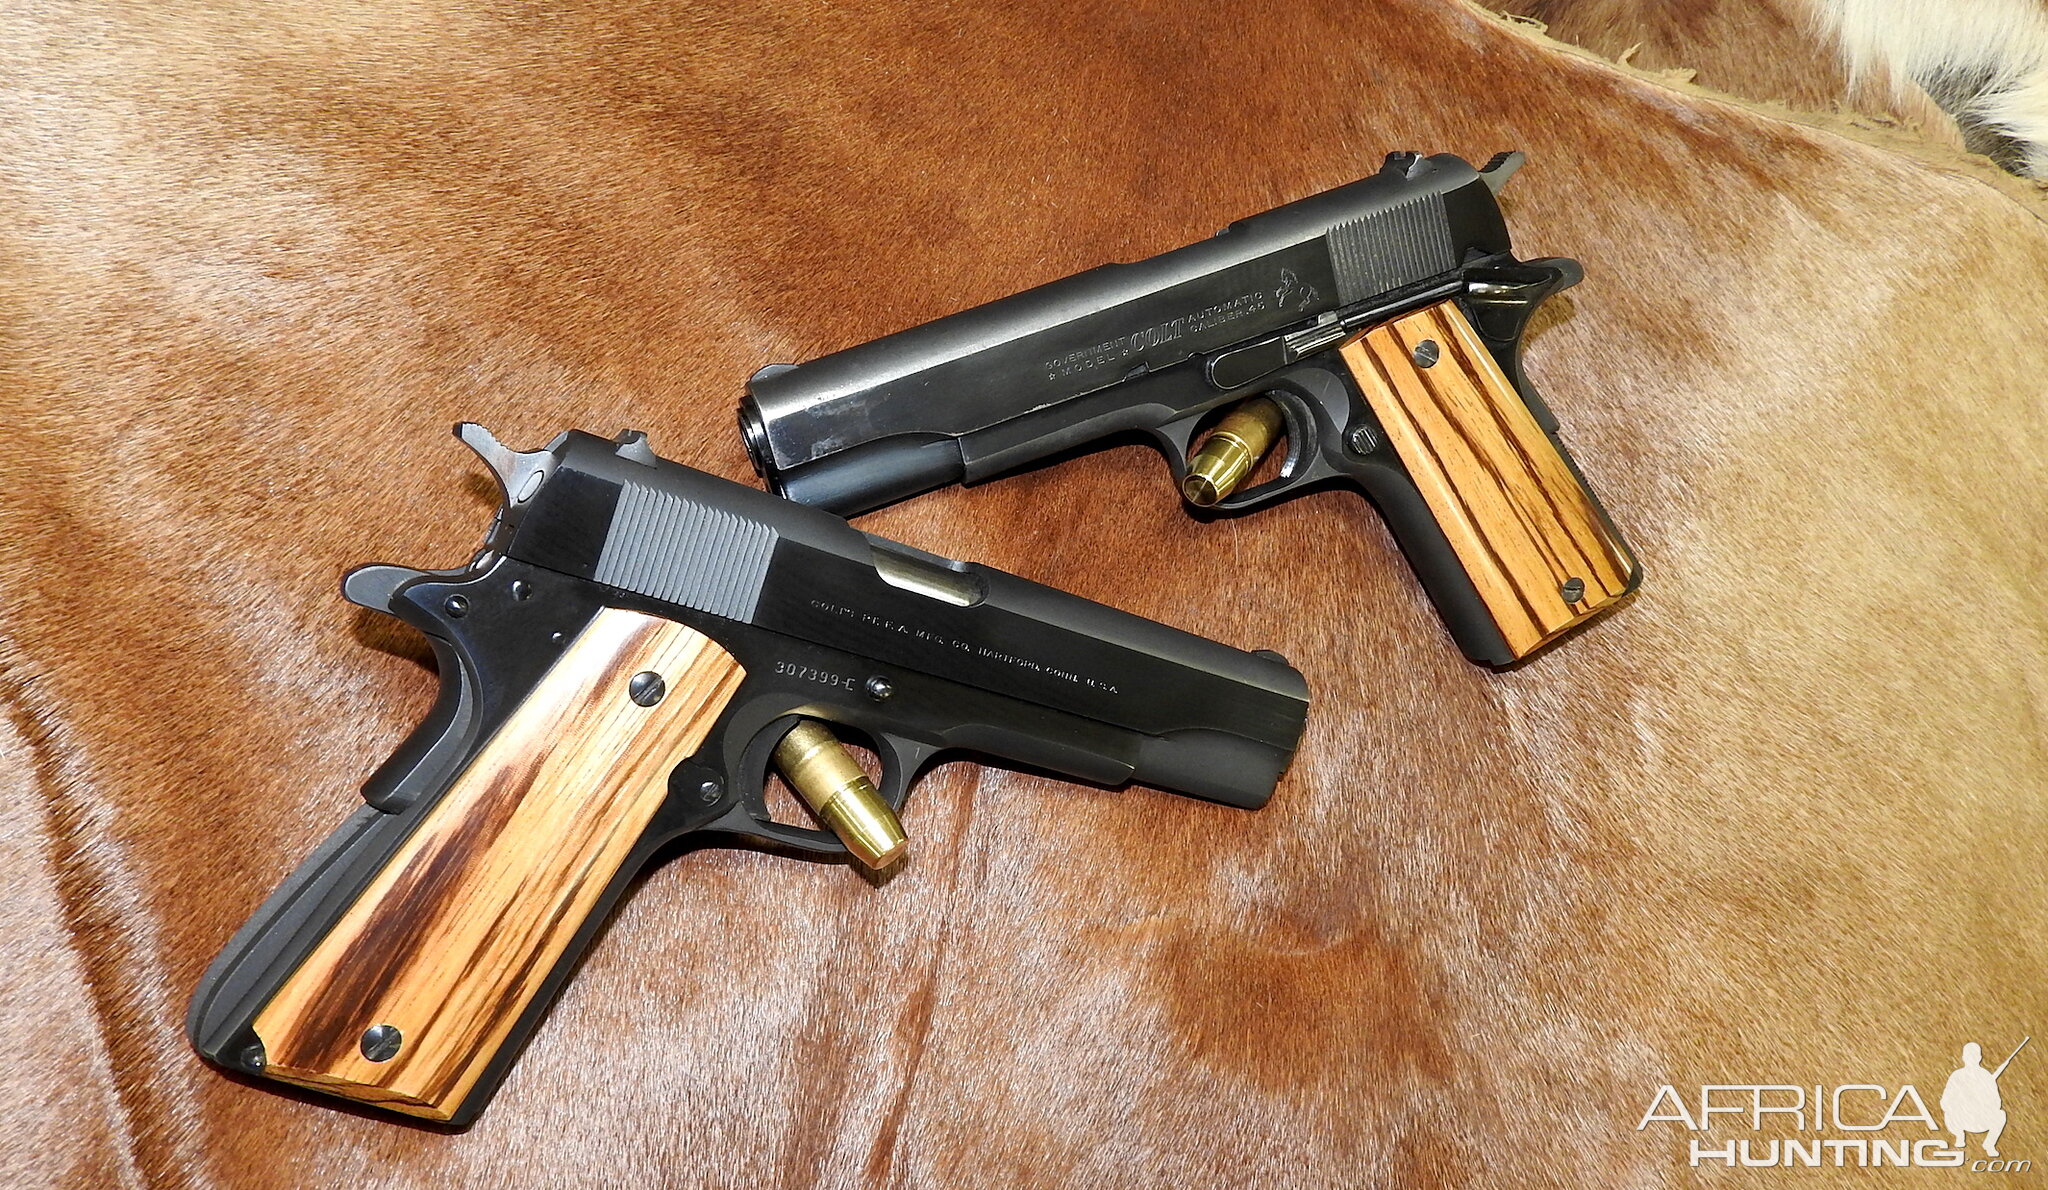 Blued Commercial Colts .45 Automatic Caliber Pistols